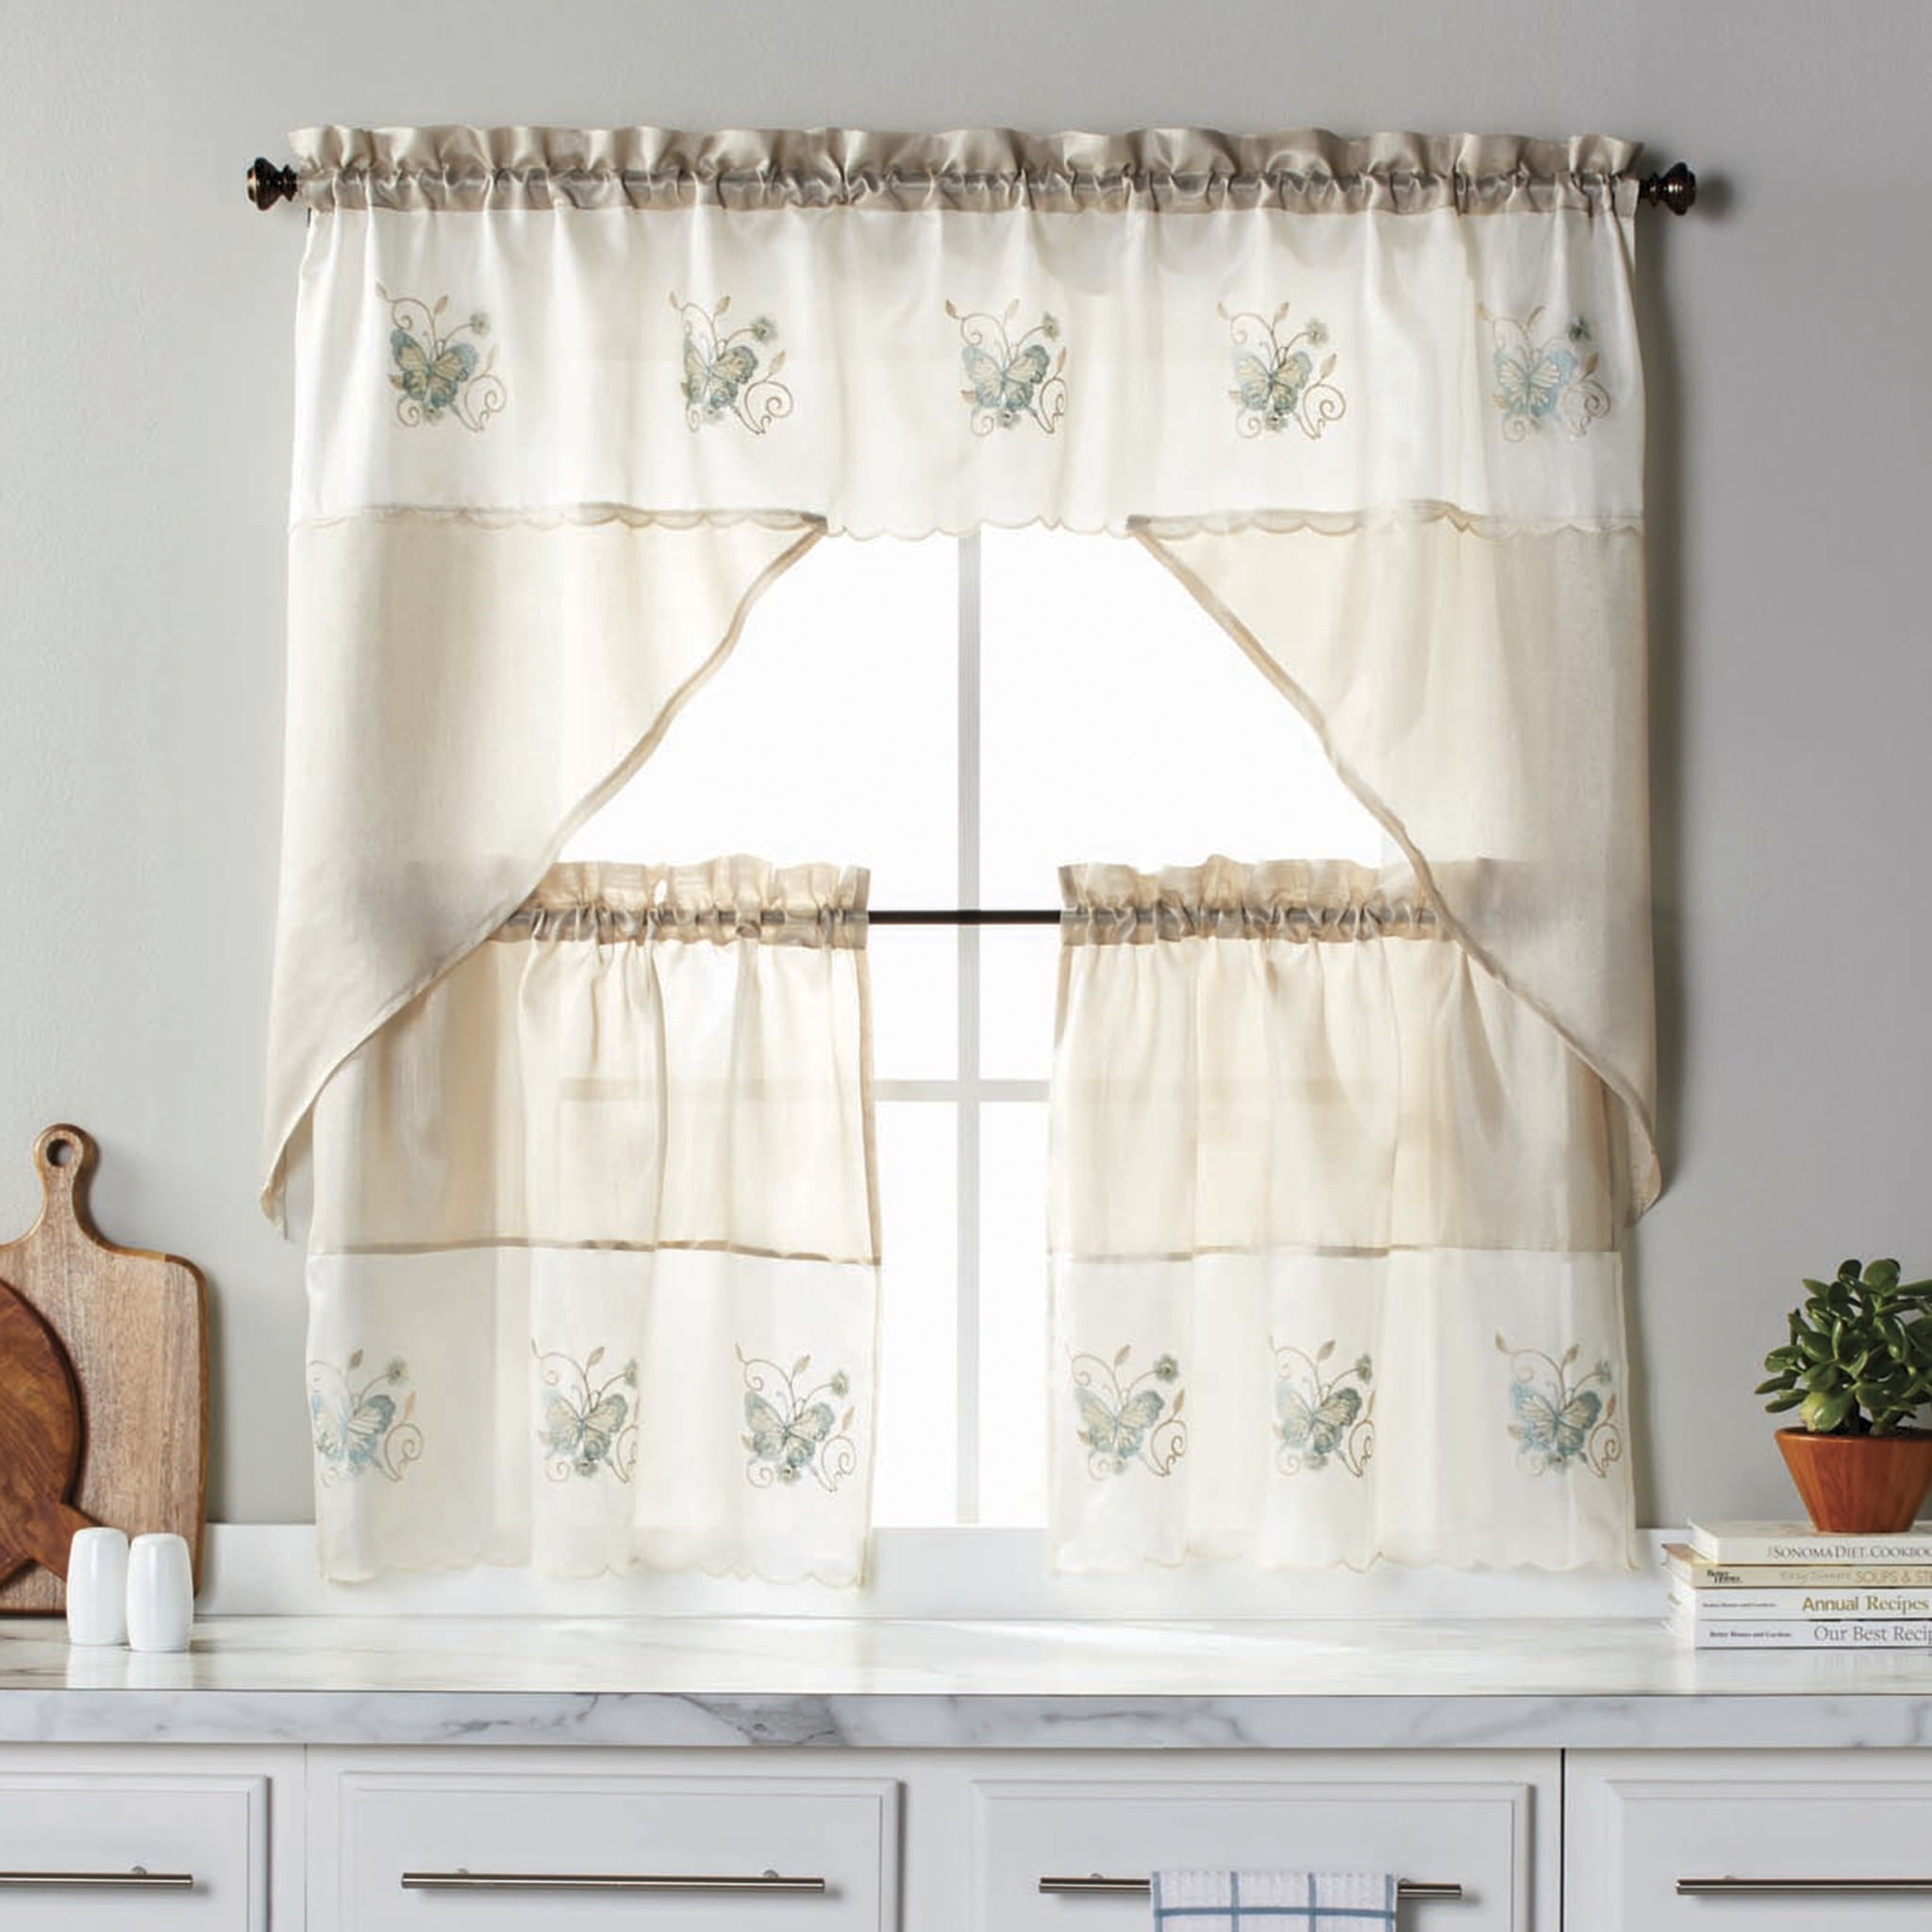 Better Homes & Gardens Light Filtering Rod Pocket Butterfly Swag and Valance Set, Brown/White, 24" x 60", Set of 3